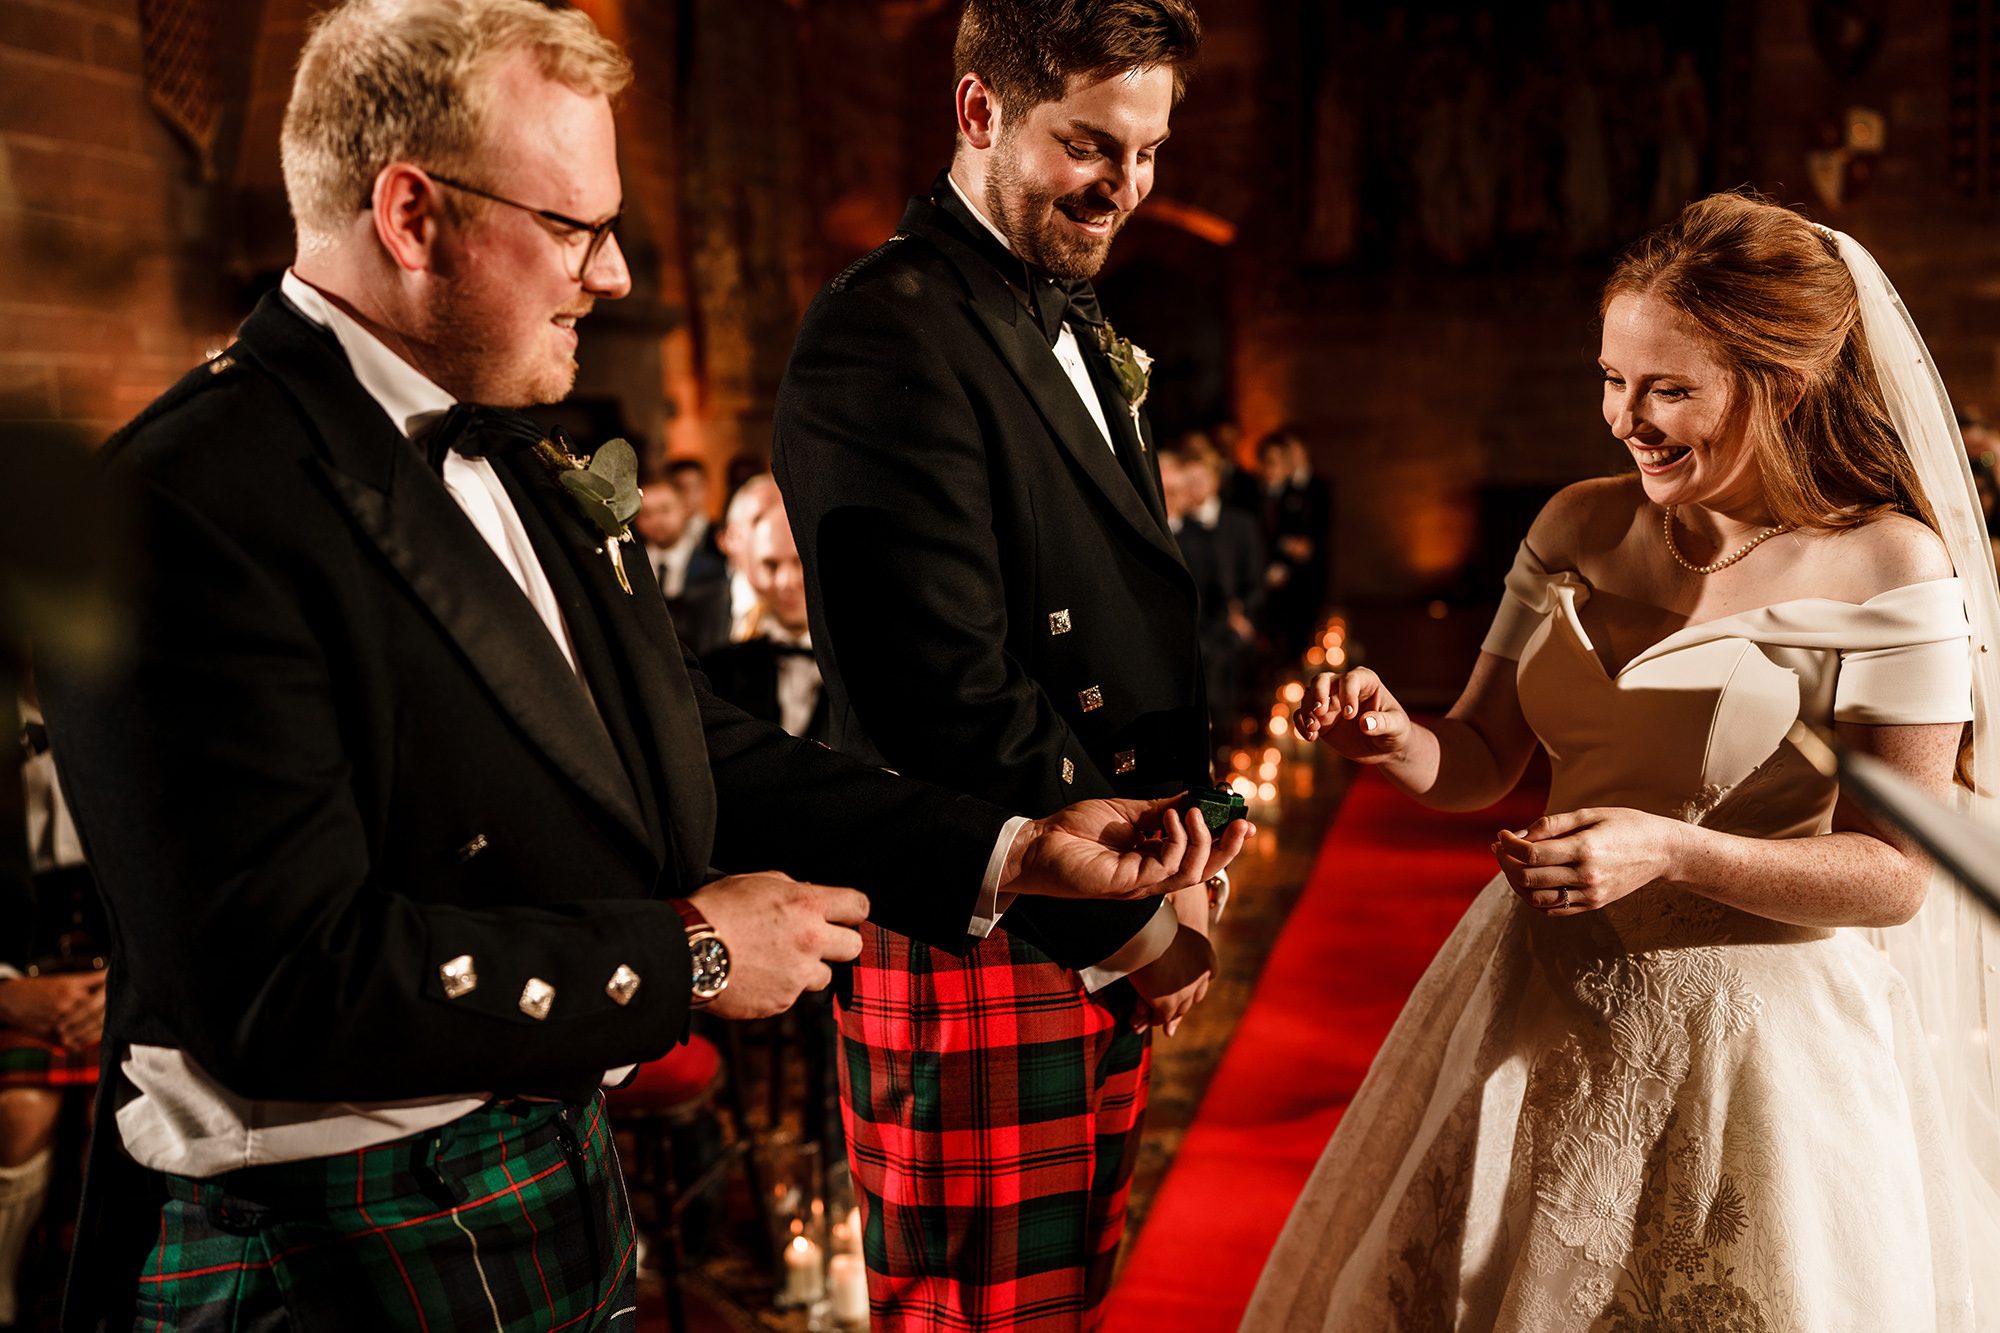 best man hands over the wedding rings to the bride at Peckforton castle